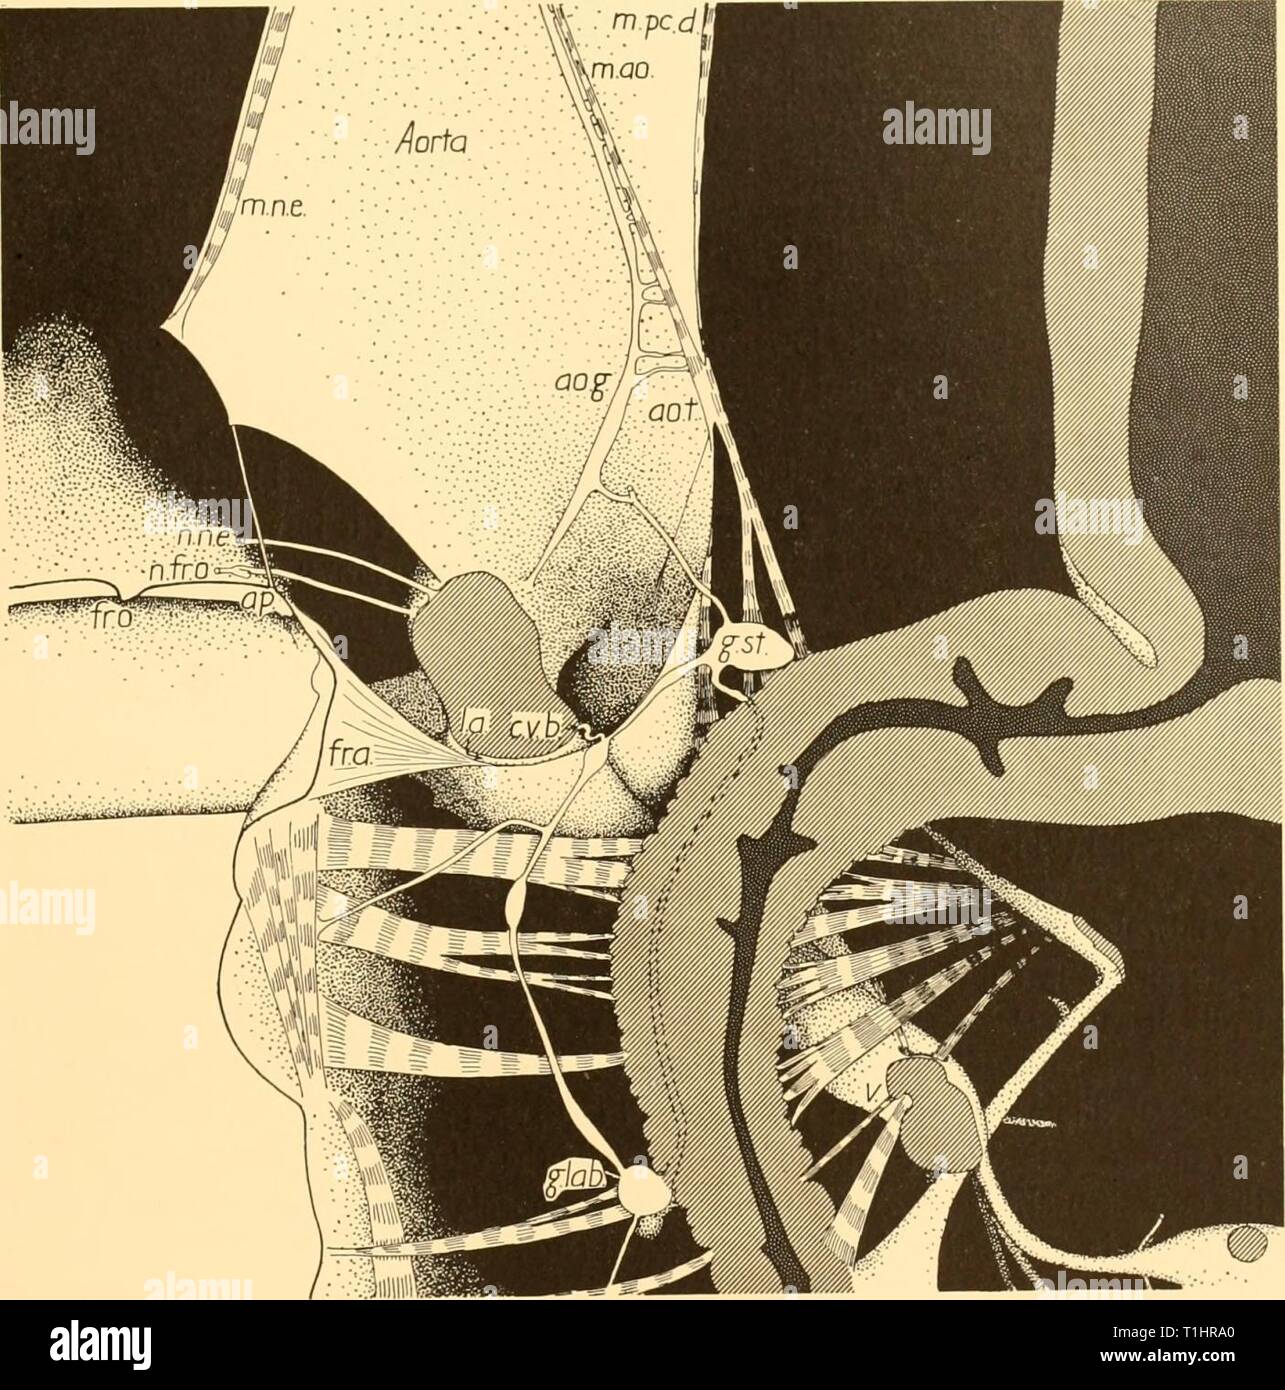 Discovery reports (1940) Discovery reports  discoveryreports19inst Year: 1940  GIGANTOCYPRIS MULLERI    Fig. 12. Same reconstruction as in Fig. 11 but from the sagittal plane showing aorta and nerve ring accurately bisected and complete visceral nervous system, ao.g. aortic ganglion; ao.t. aortic tendon; ap. apodeme supporting nauplius eye muscle; c.v.b. connexion between visceral system (labral loop) and brain;fr.a. frontal apodeme; fr.o. frontal organ; g.lab. labral ganglion; g.st. stomach ganglion; La. labral artery; m.ao. aortic muscle; m.n.e. nauplius eye muscle; m.pc.d. pericardial dilat Stock Photo